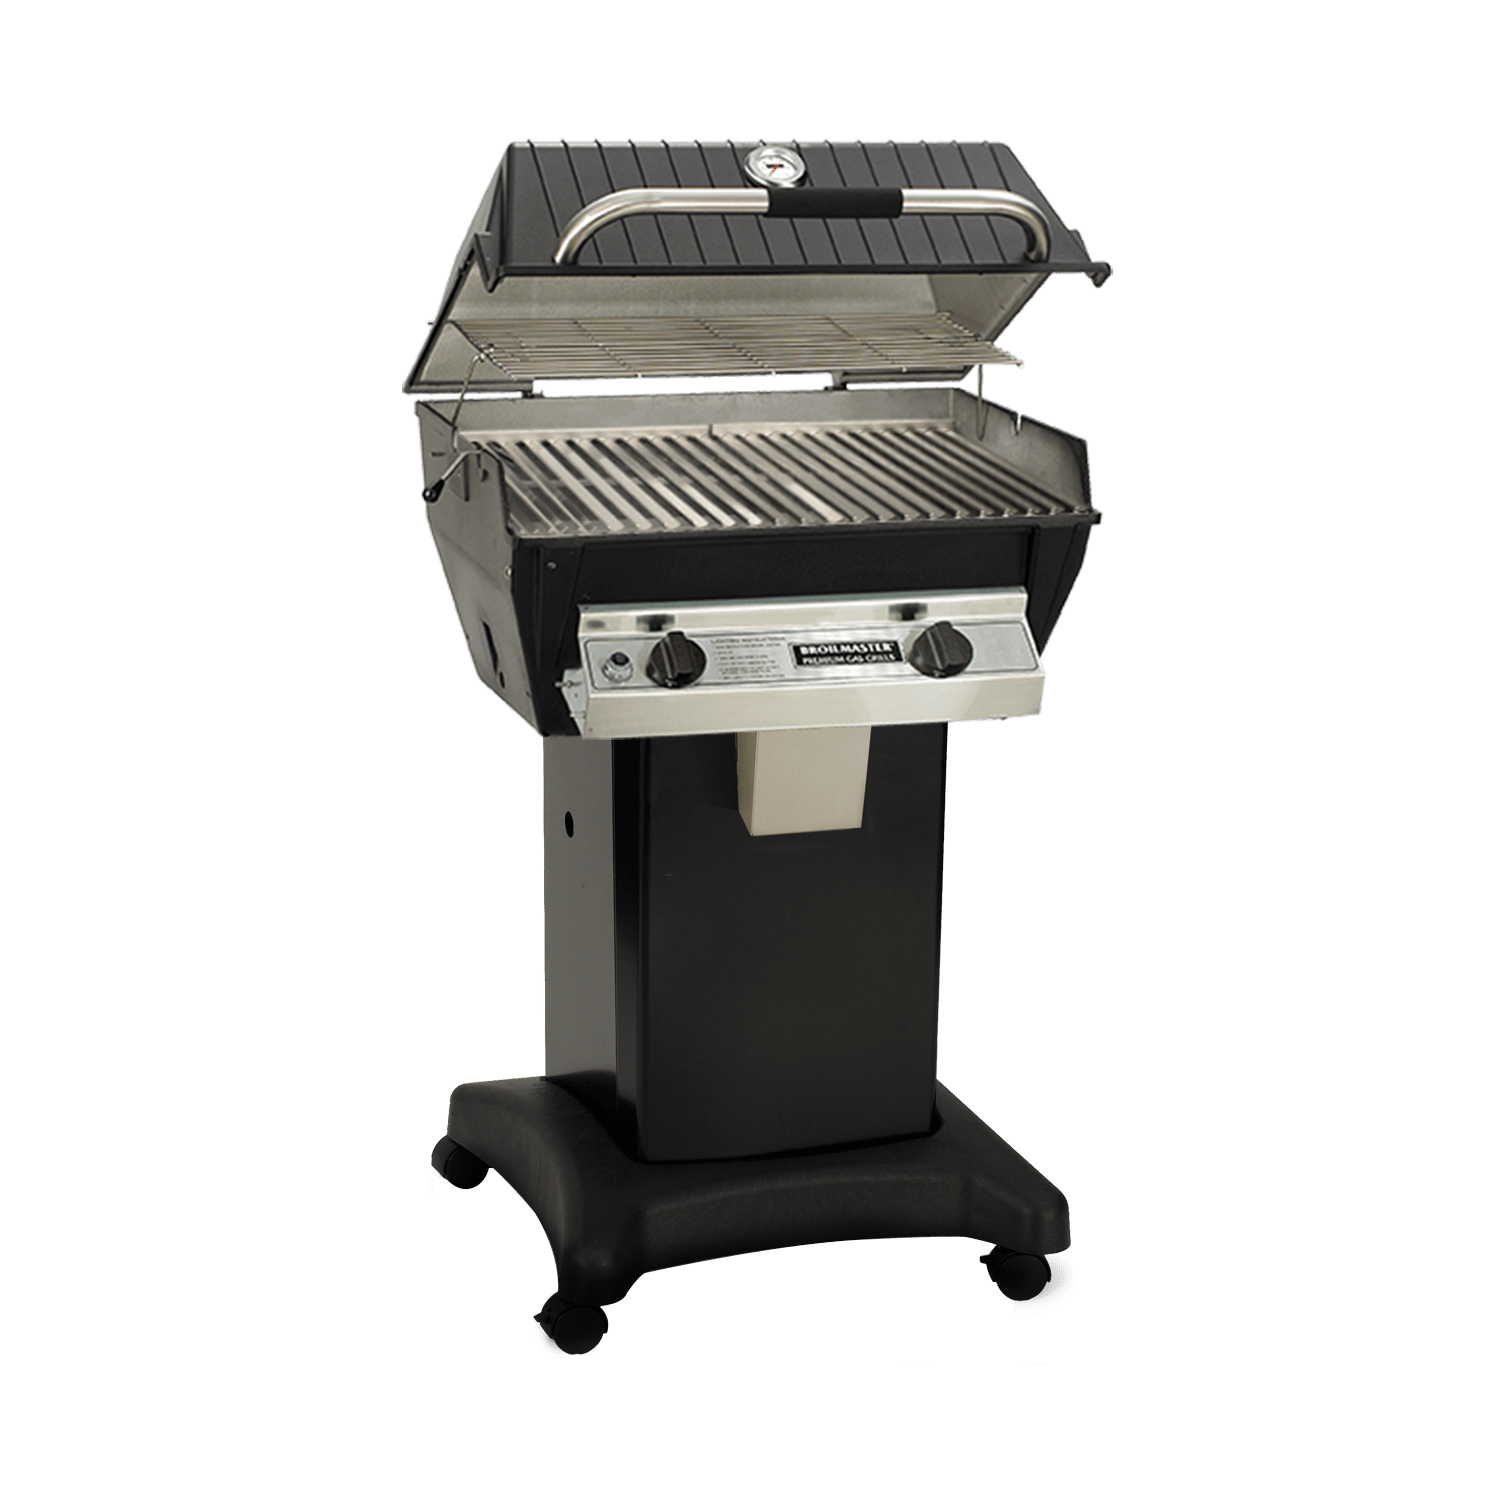 BroilMaster R3B infrared Combo Grill 2